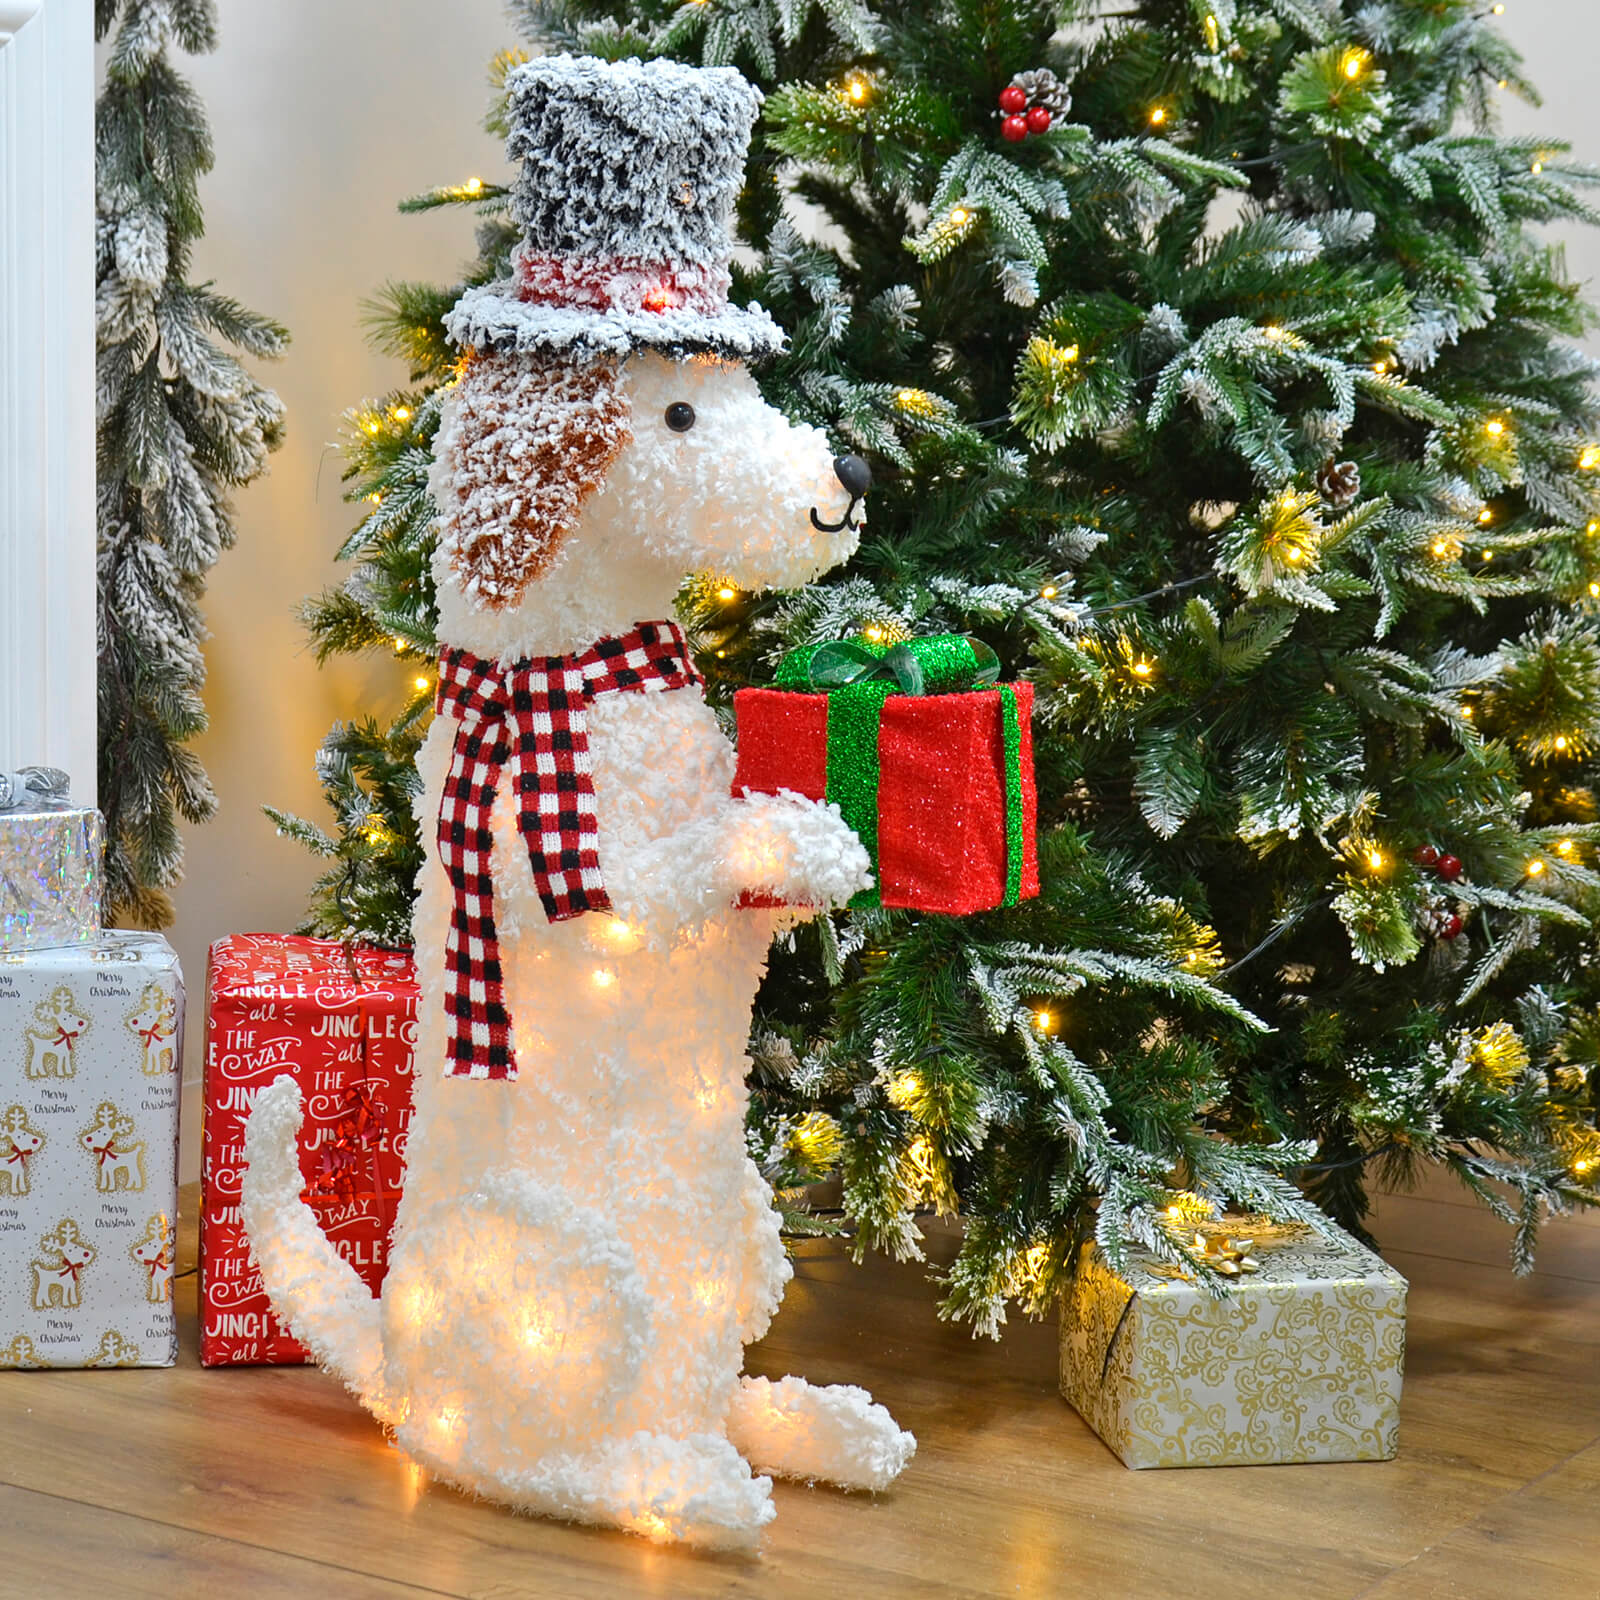 Large white snow dog Christmas ornament with scarf and top hat, holding a red and green Christmas present beside a lit Christmas tree